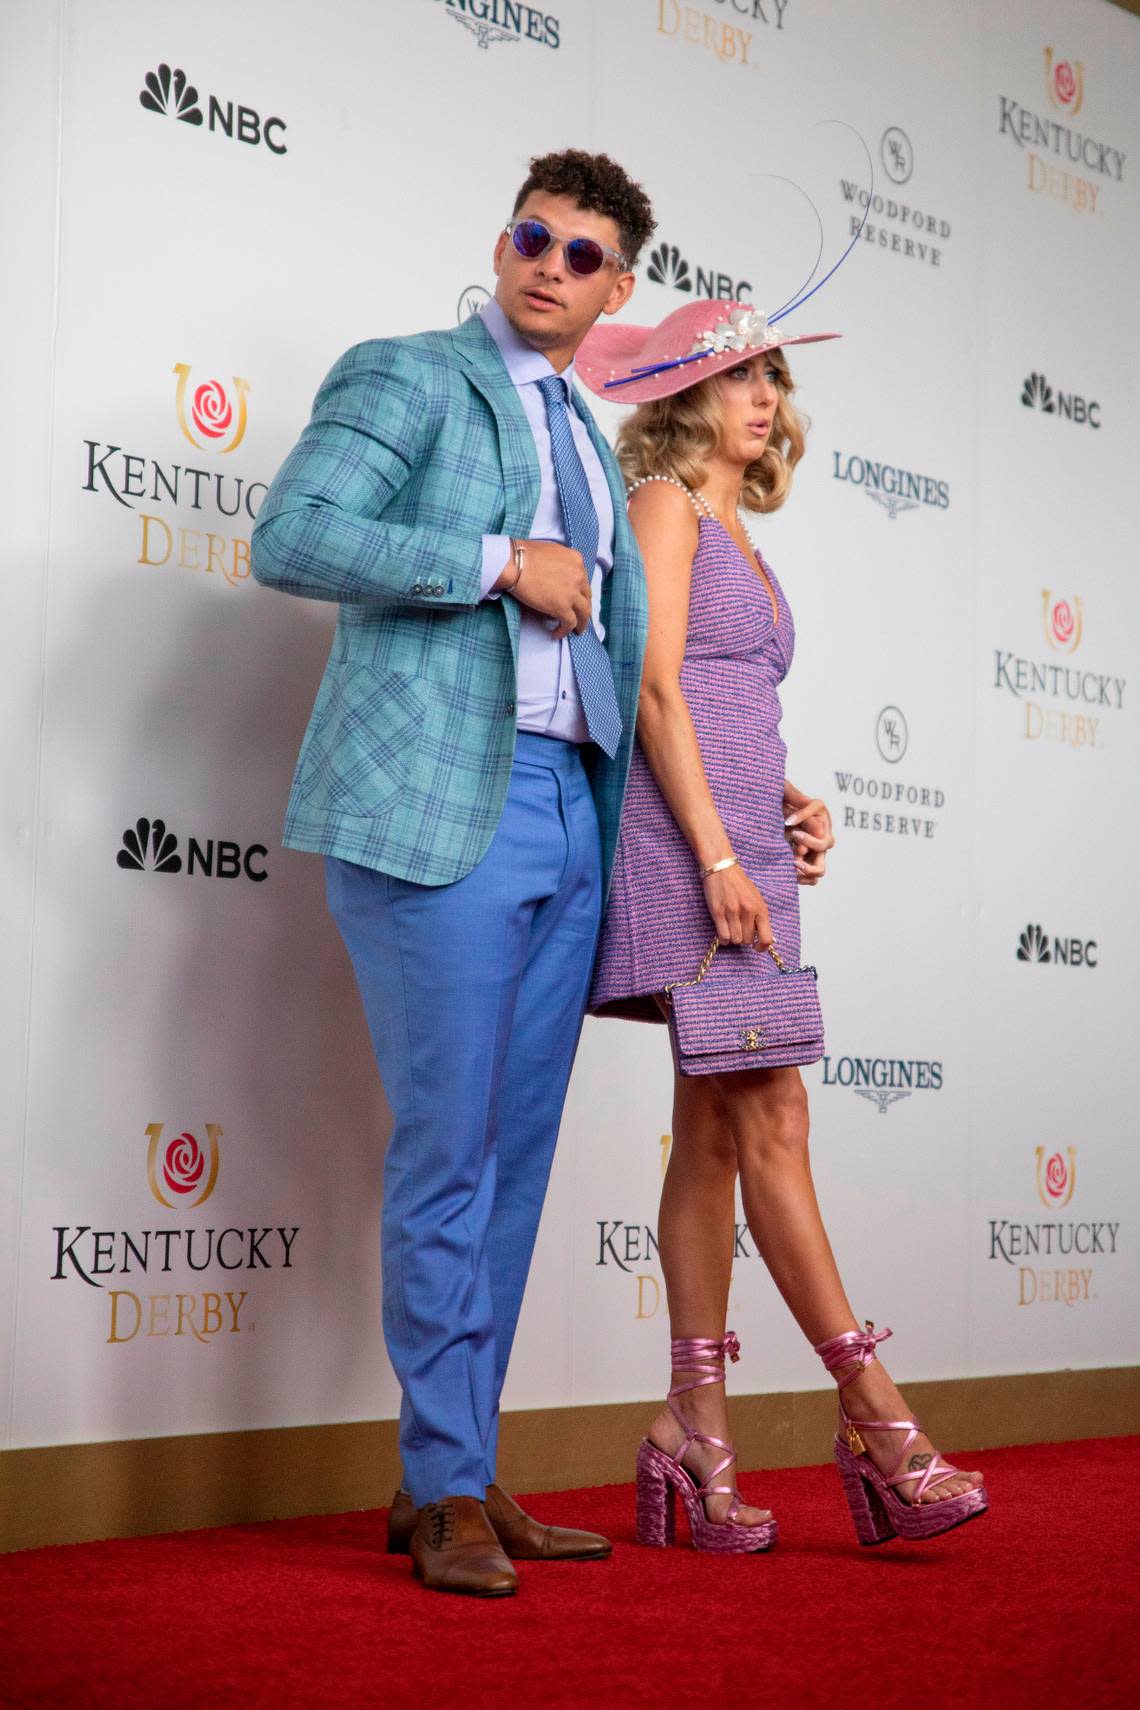 Kansas City Chiefs’ quarterback Patrick Mahomes and wife Brittany take to the red carpet at Churchill Downs before the start of 149th Kentucky Derby in Louisville, Kentucky on Saturday, May 6, 2023. Gabi Broekema/Gabi Broekema